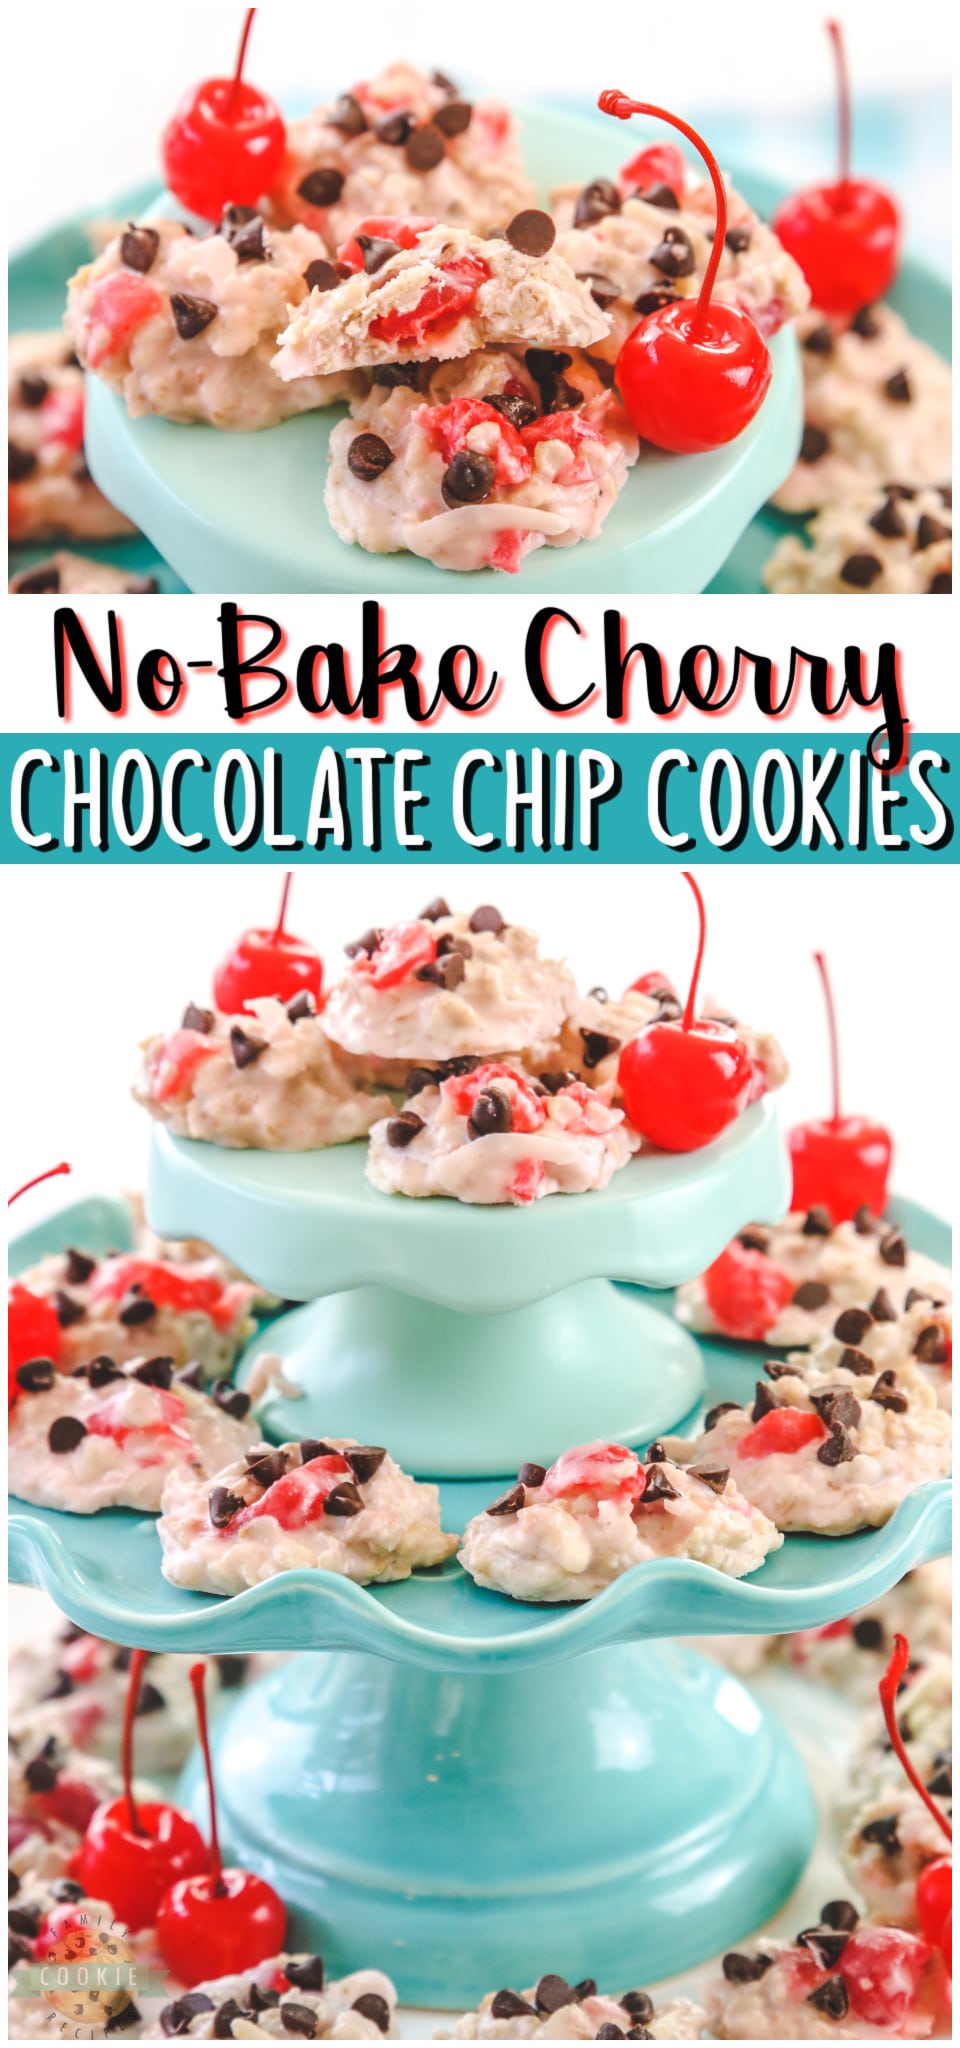 Cherry Chocolate Chip No Bake Cookies are fruity, festive  & so simple to make! Incredibly cherry almond vanilla flavor in these easy no-bake cookie recipe. #nobake #cookies #vanilla #cherry #almond #Valentines #dessert #easyrecipe from FAMILY COOKIE RECIPES via @buttergirls